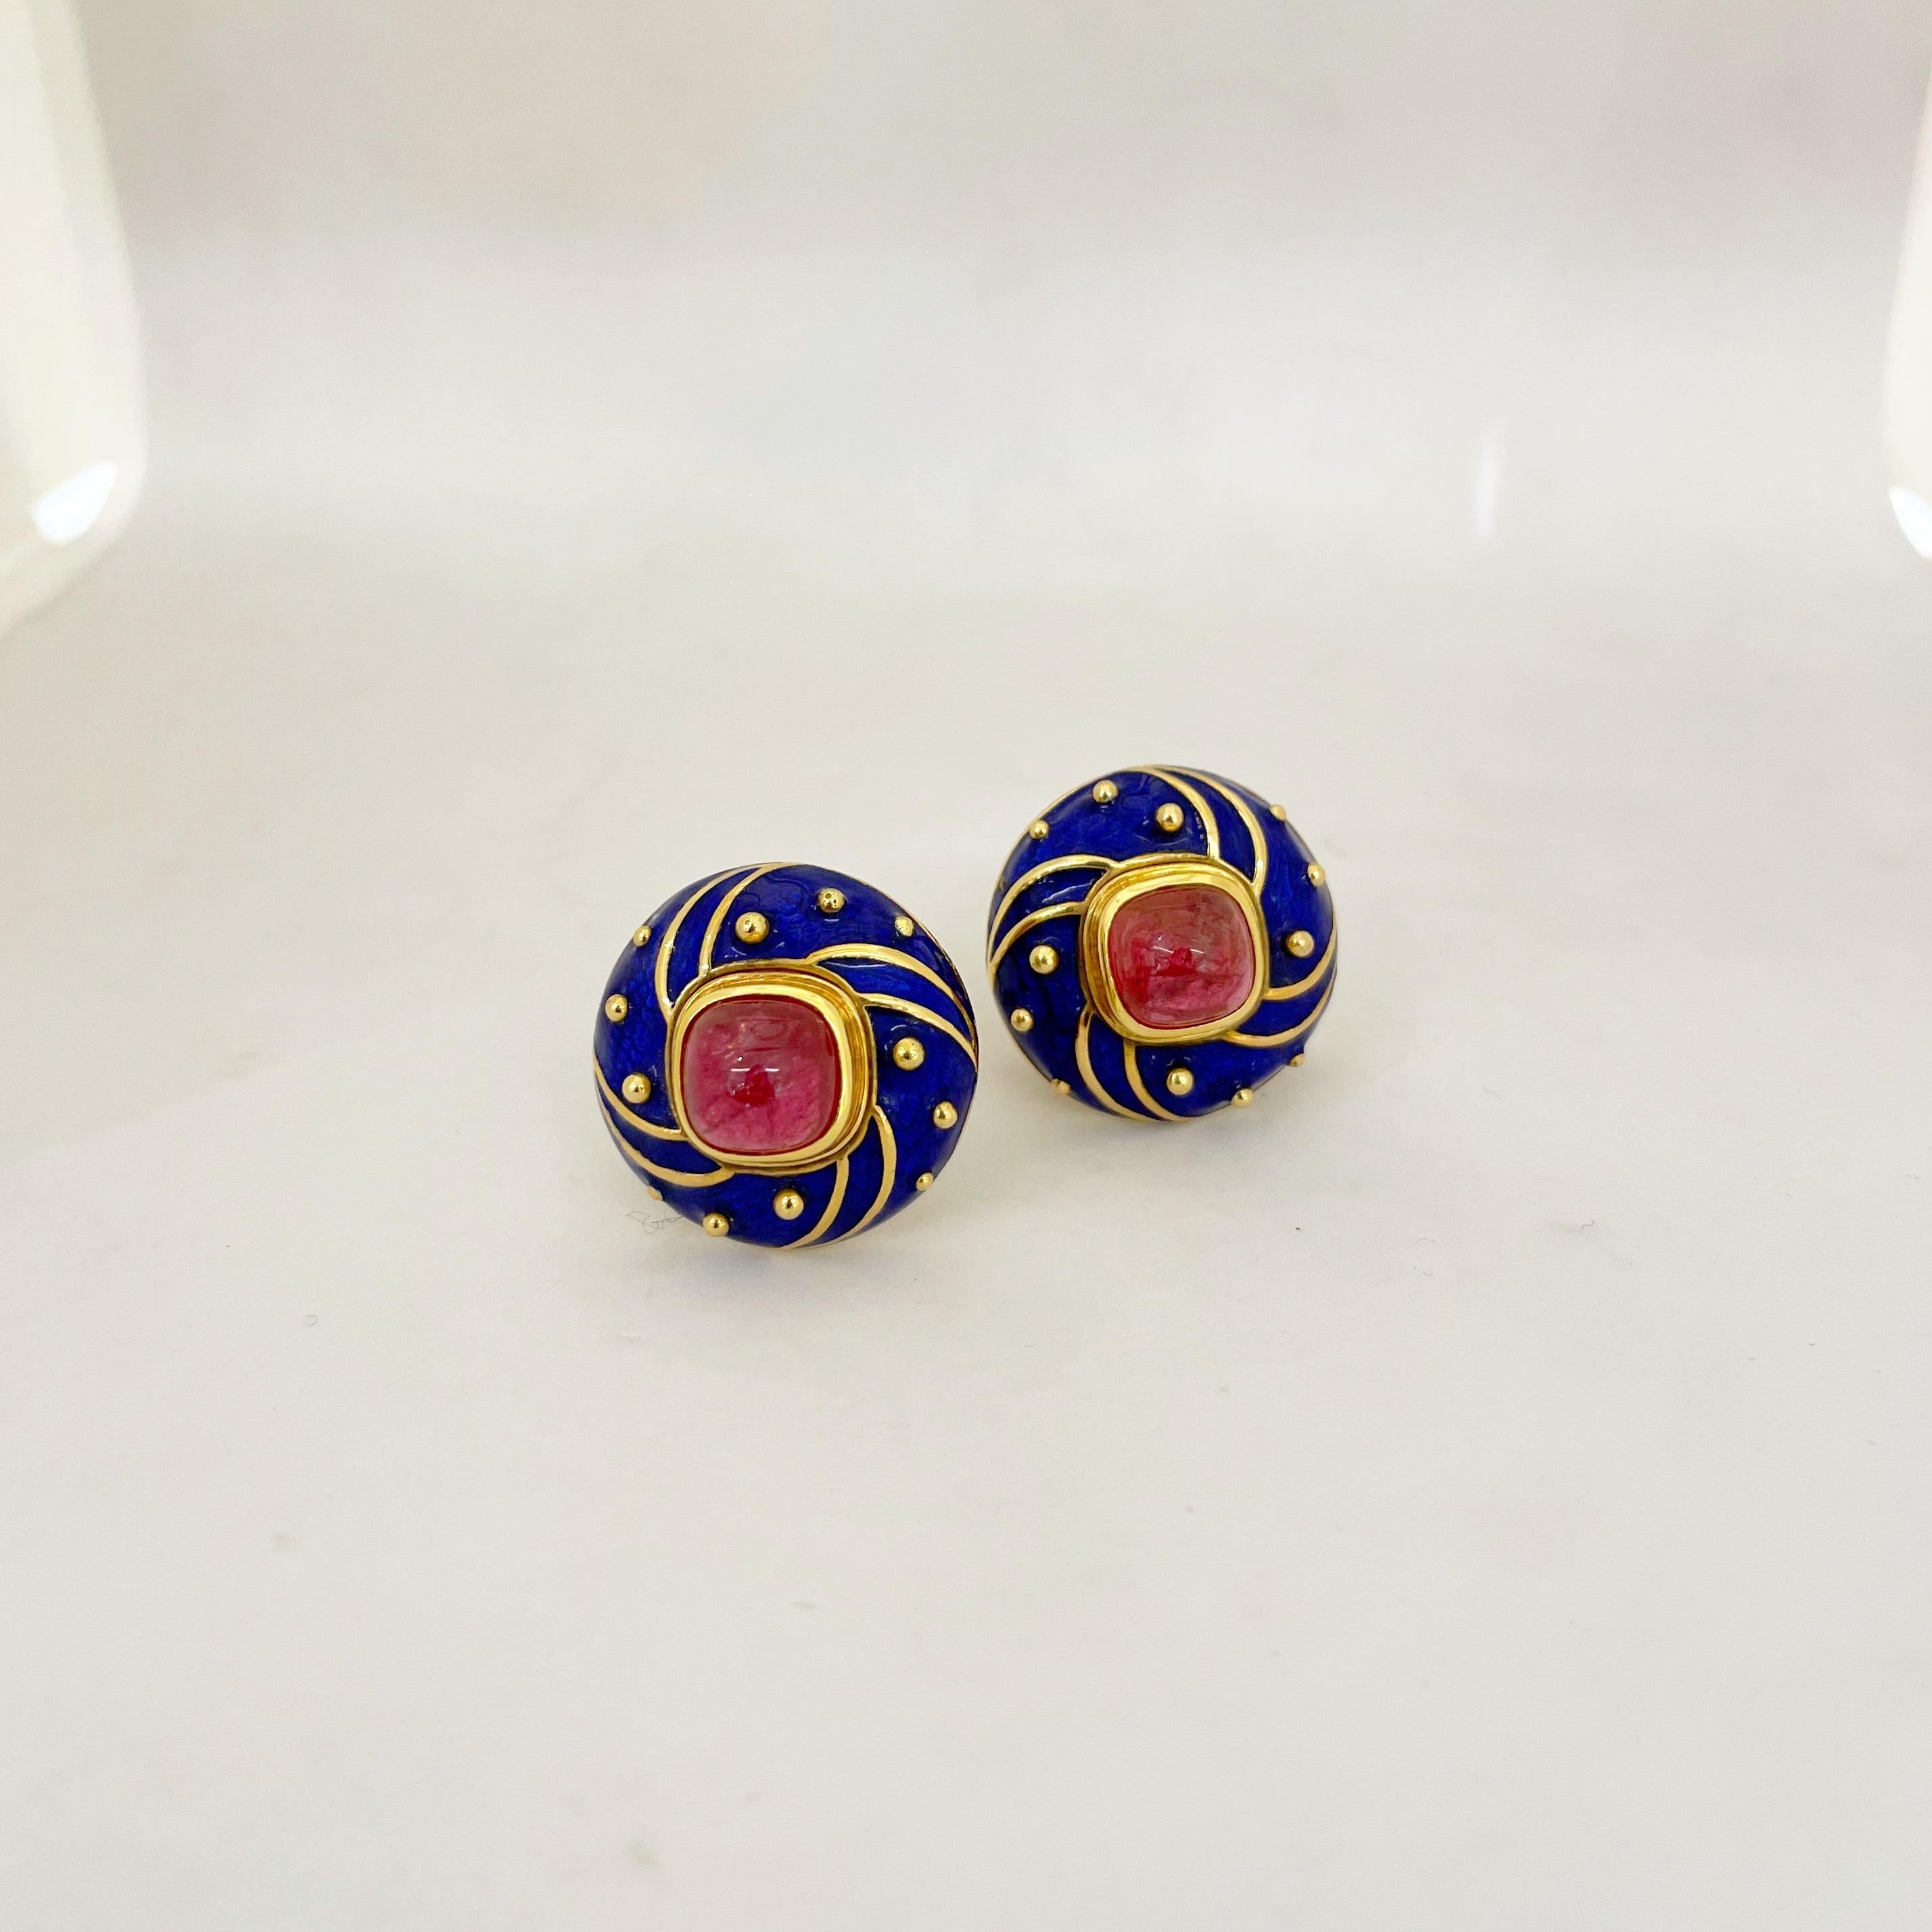 Cellini NYC 18 karat yellow gold button style earrings. These classic earrings are designed with a brilliant blue enamel accented with yellow gold beads and swirls. The earrings center bezel set cabochon pink tourmalines. The earrings are pierced